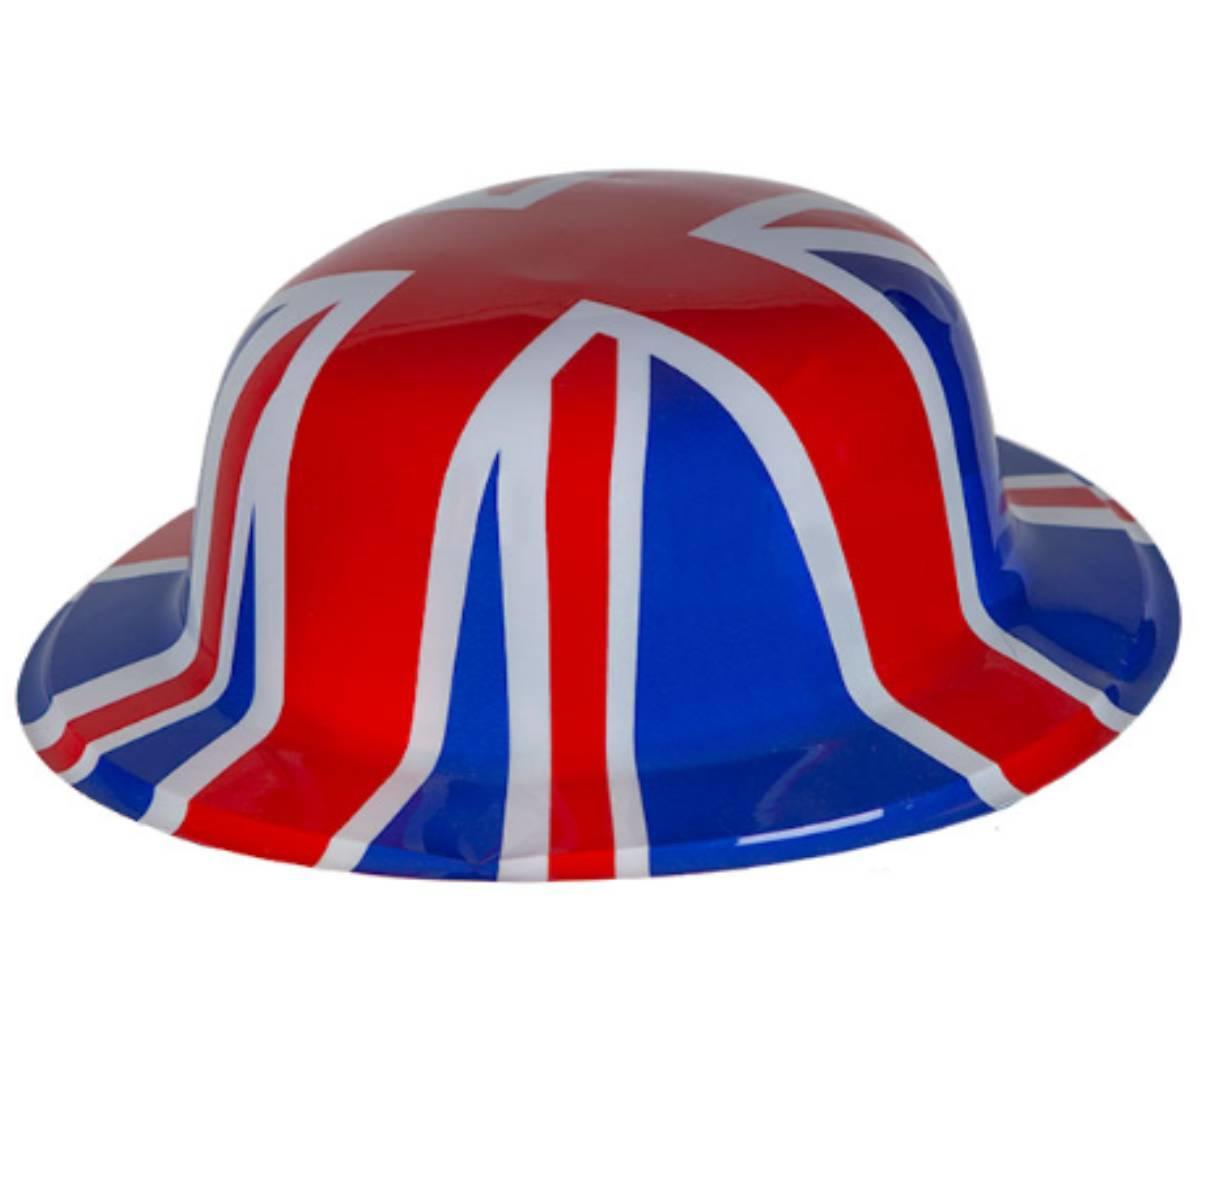 Adult Union Jack Flag Party Bowler Hat by Wicked Costumes AC-9443 available here at Karnival Costumes online party shop